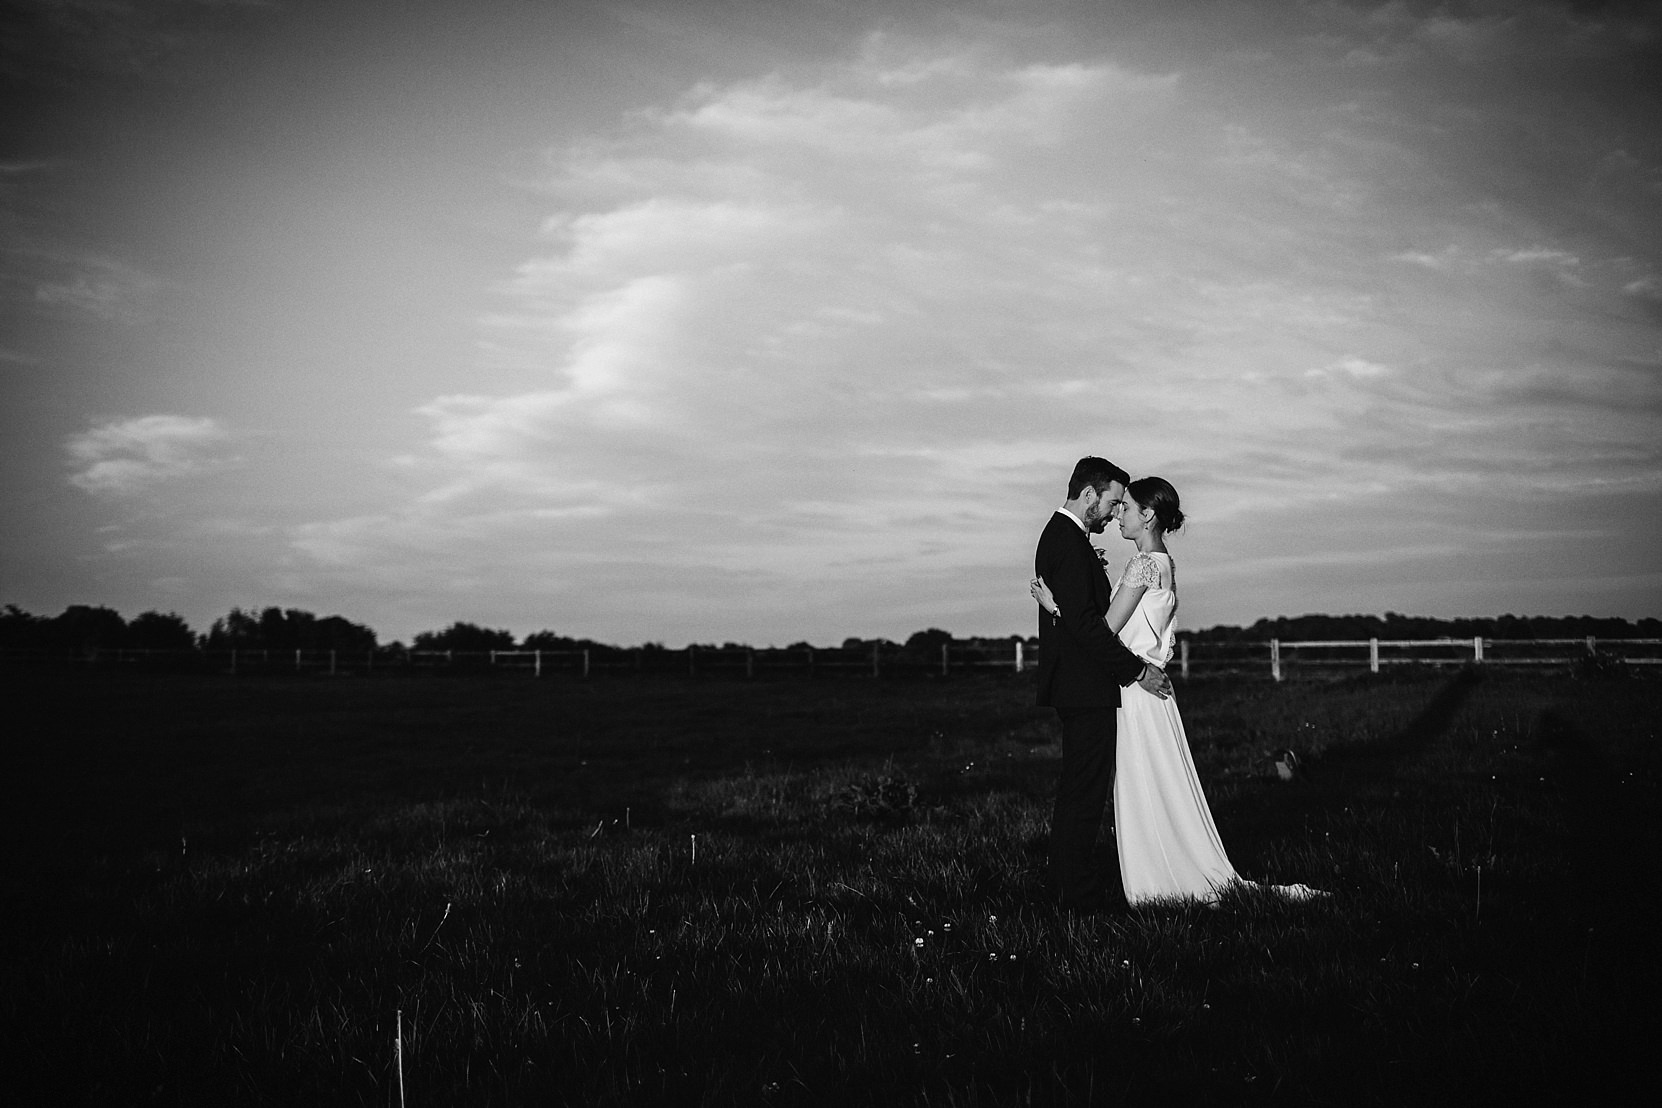 Romantic shot of a bride and groom in a beautiful setting at sunset